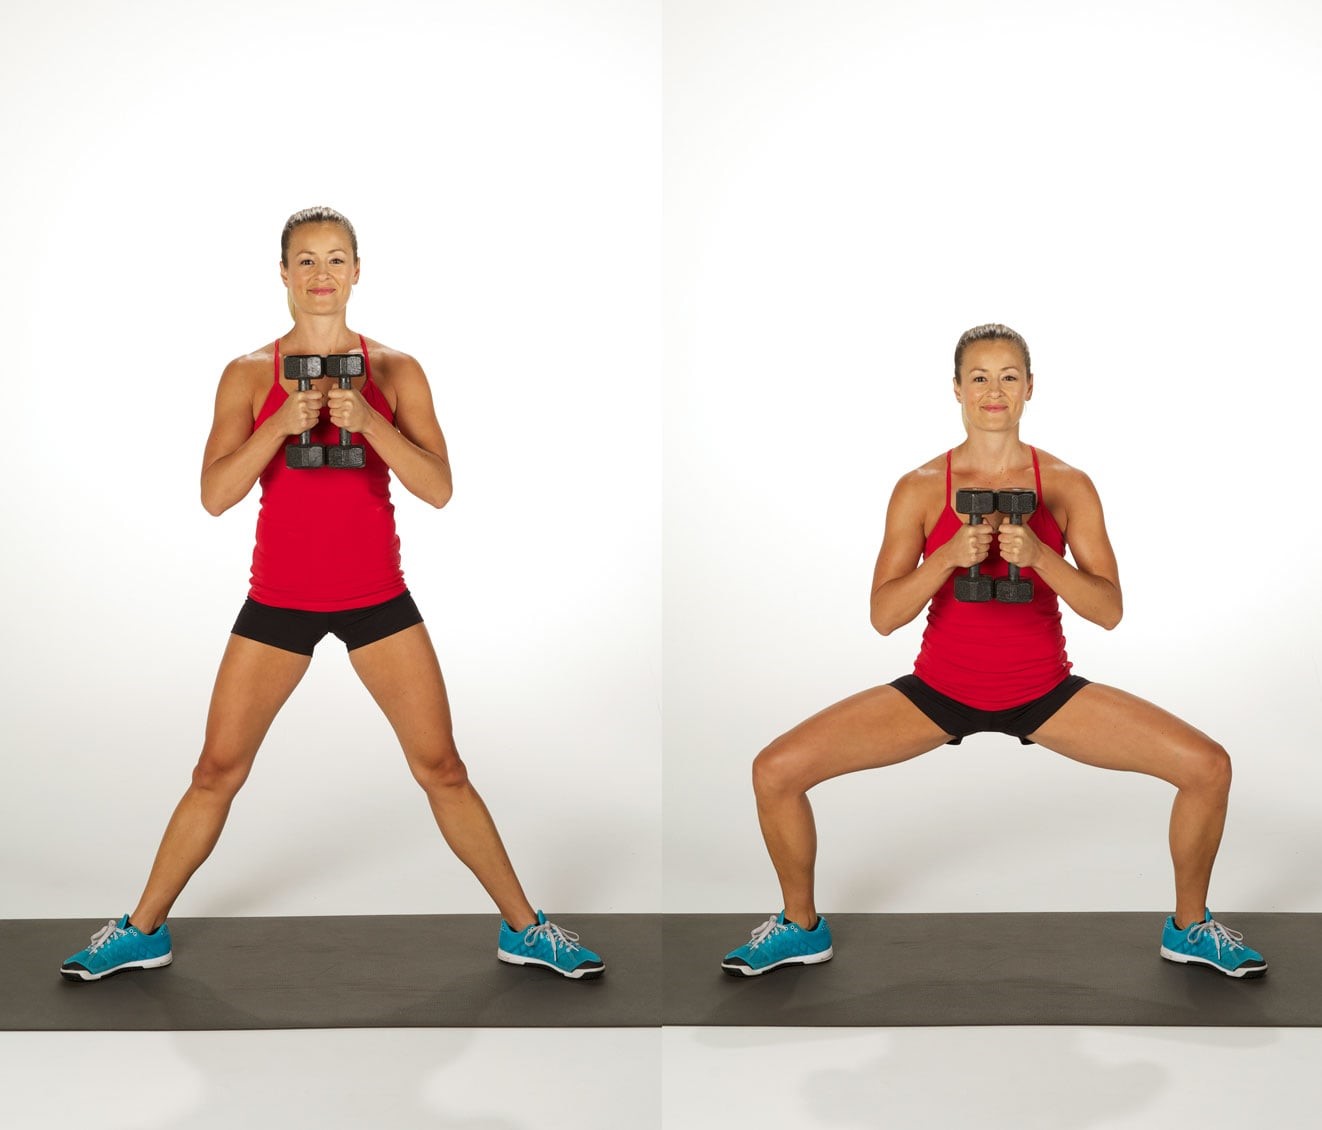 Steps to perform the Sumo Squats using dumbbells